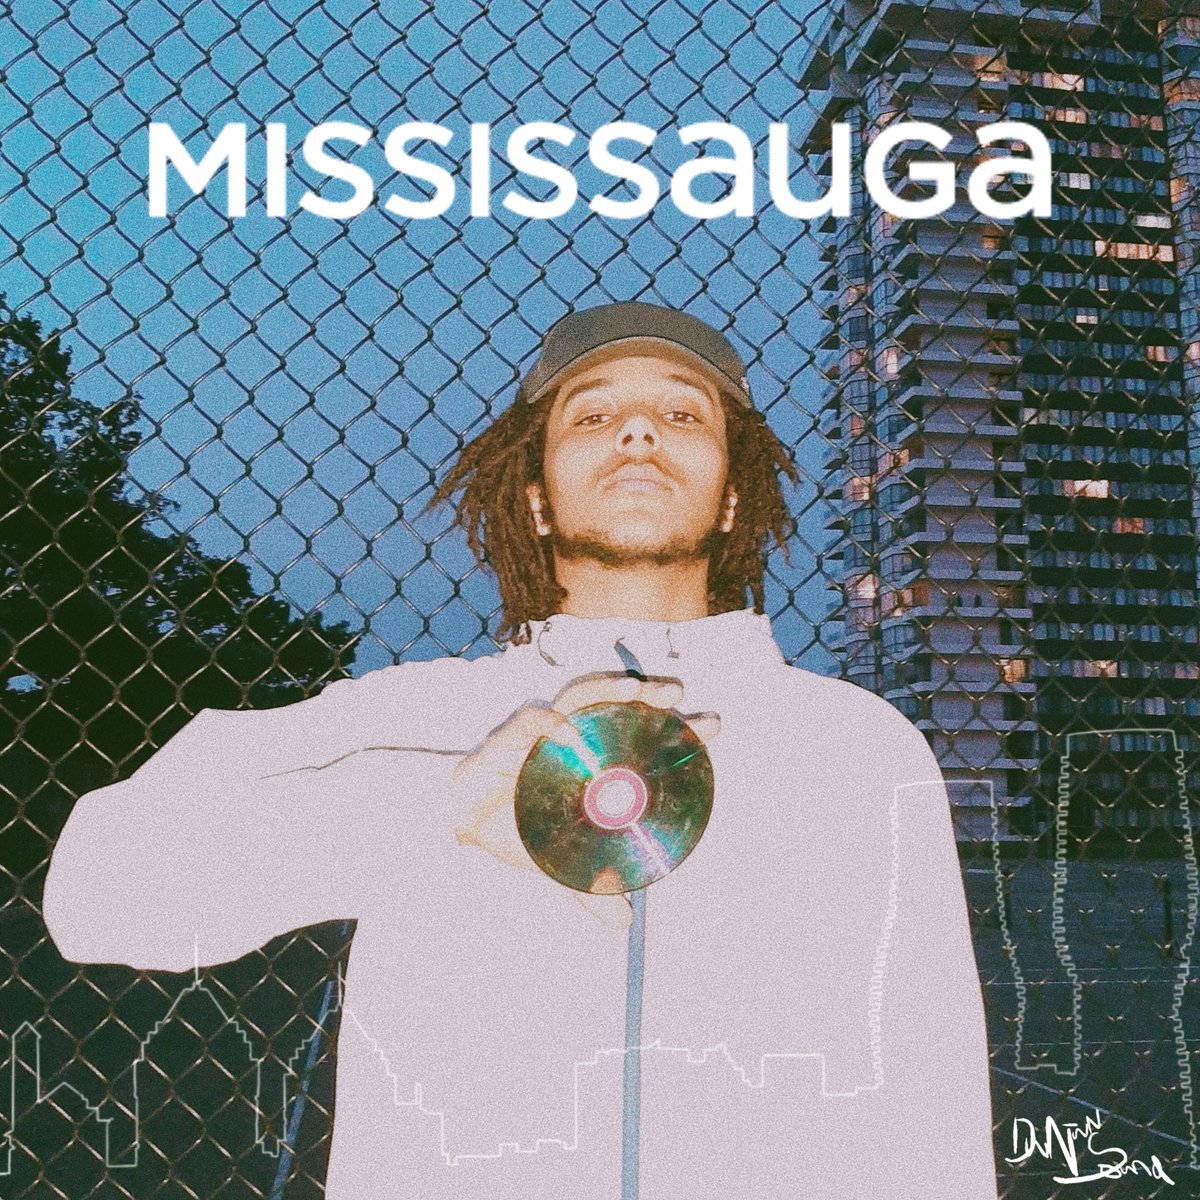 🎵There’s no city that’s better🎵 #DYK Mississauga's 50th Anniversary has its own anthem? Local rapper @mikeybloom_ won the 50th Anniversary Anthem Contest hosted by the @MissArtsCouncil, @metalworksSOUND & @SoundsUOfficial Listen here: bit.ly/3JHq6UG #Mississauga50